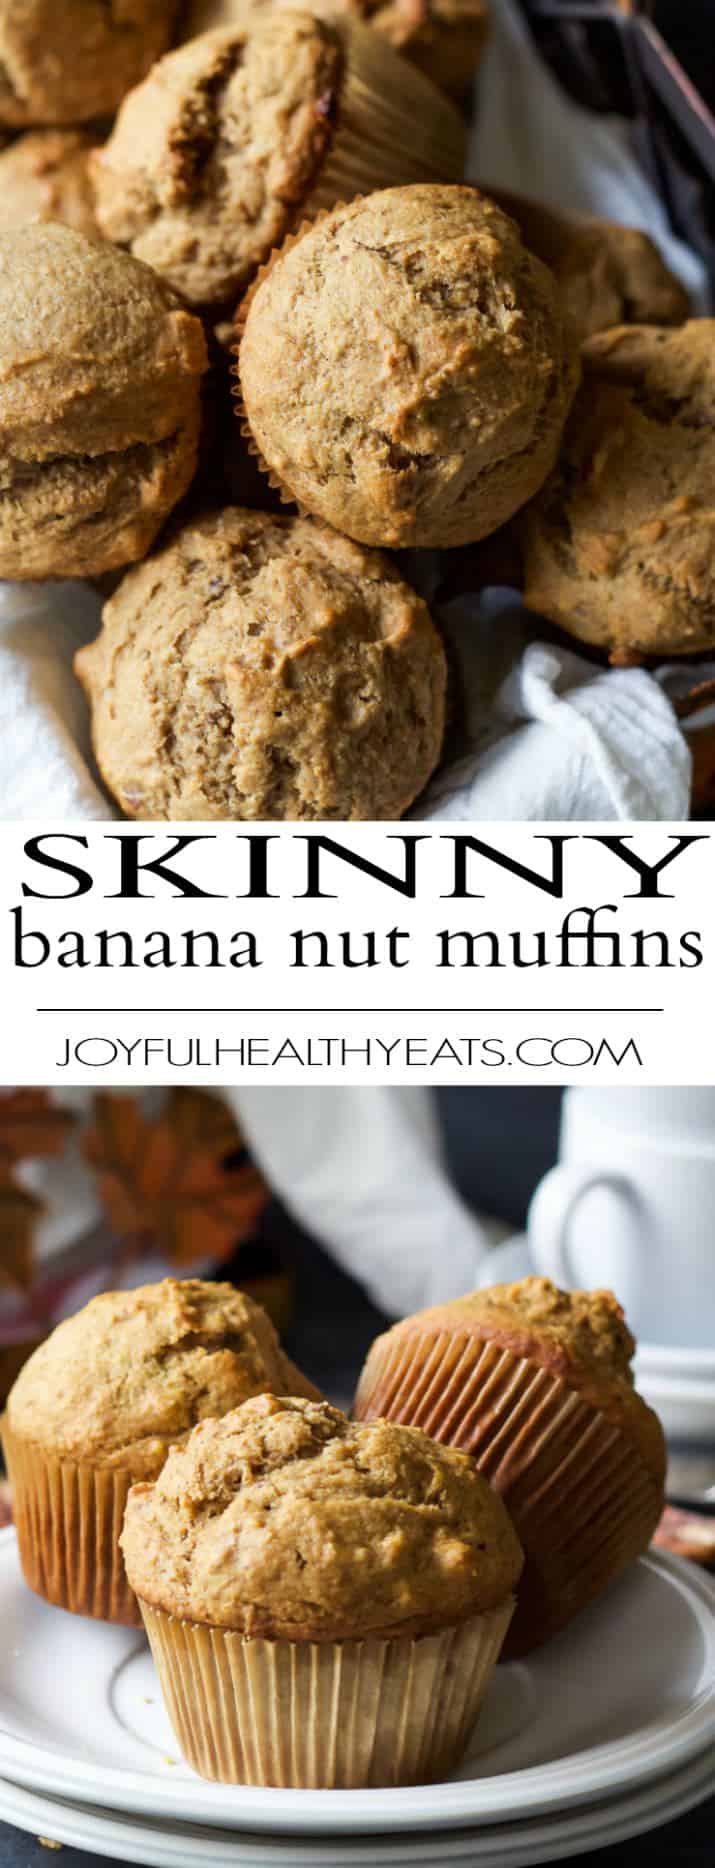 Skinny Banana Nut Muffins, everyone needs a classic muffin recipe and this is it! Moist, delicious, sweetened with honey, and only 205 calories - the perfect on-the-go breakfast! | joyfulhealthyeats.com #recipes